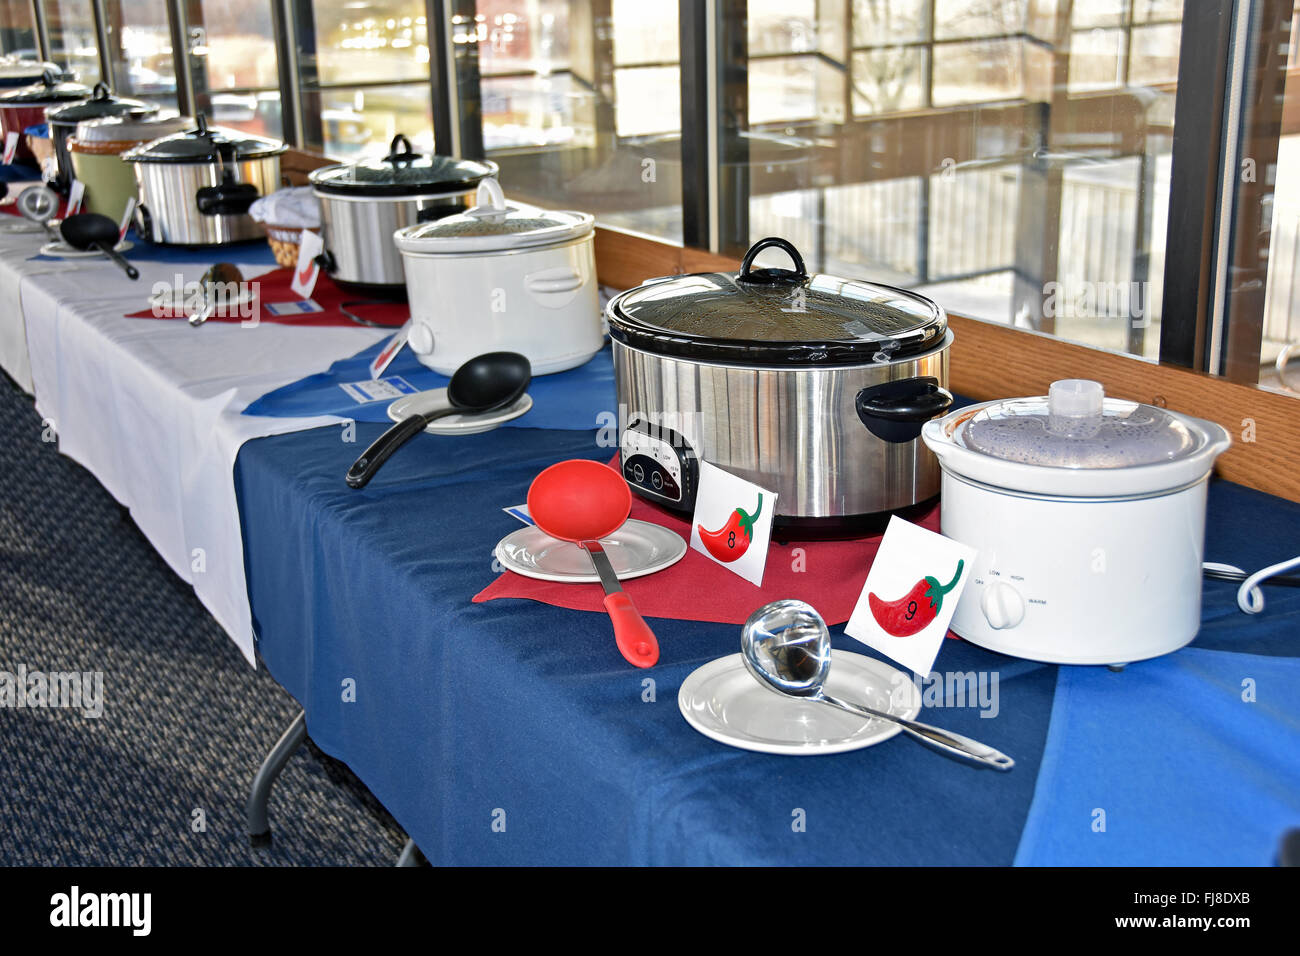 Row of crock pots in a chili cook off contest in restaurant. Stock Photo